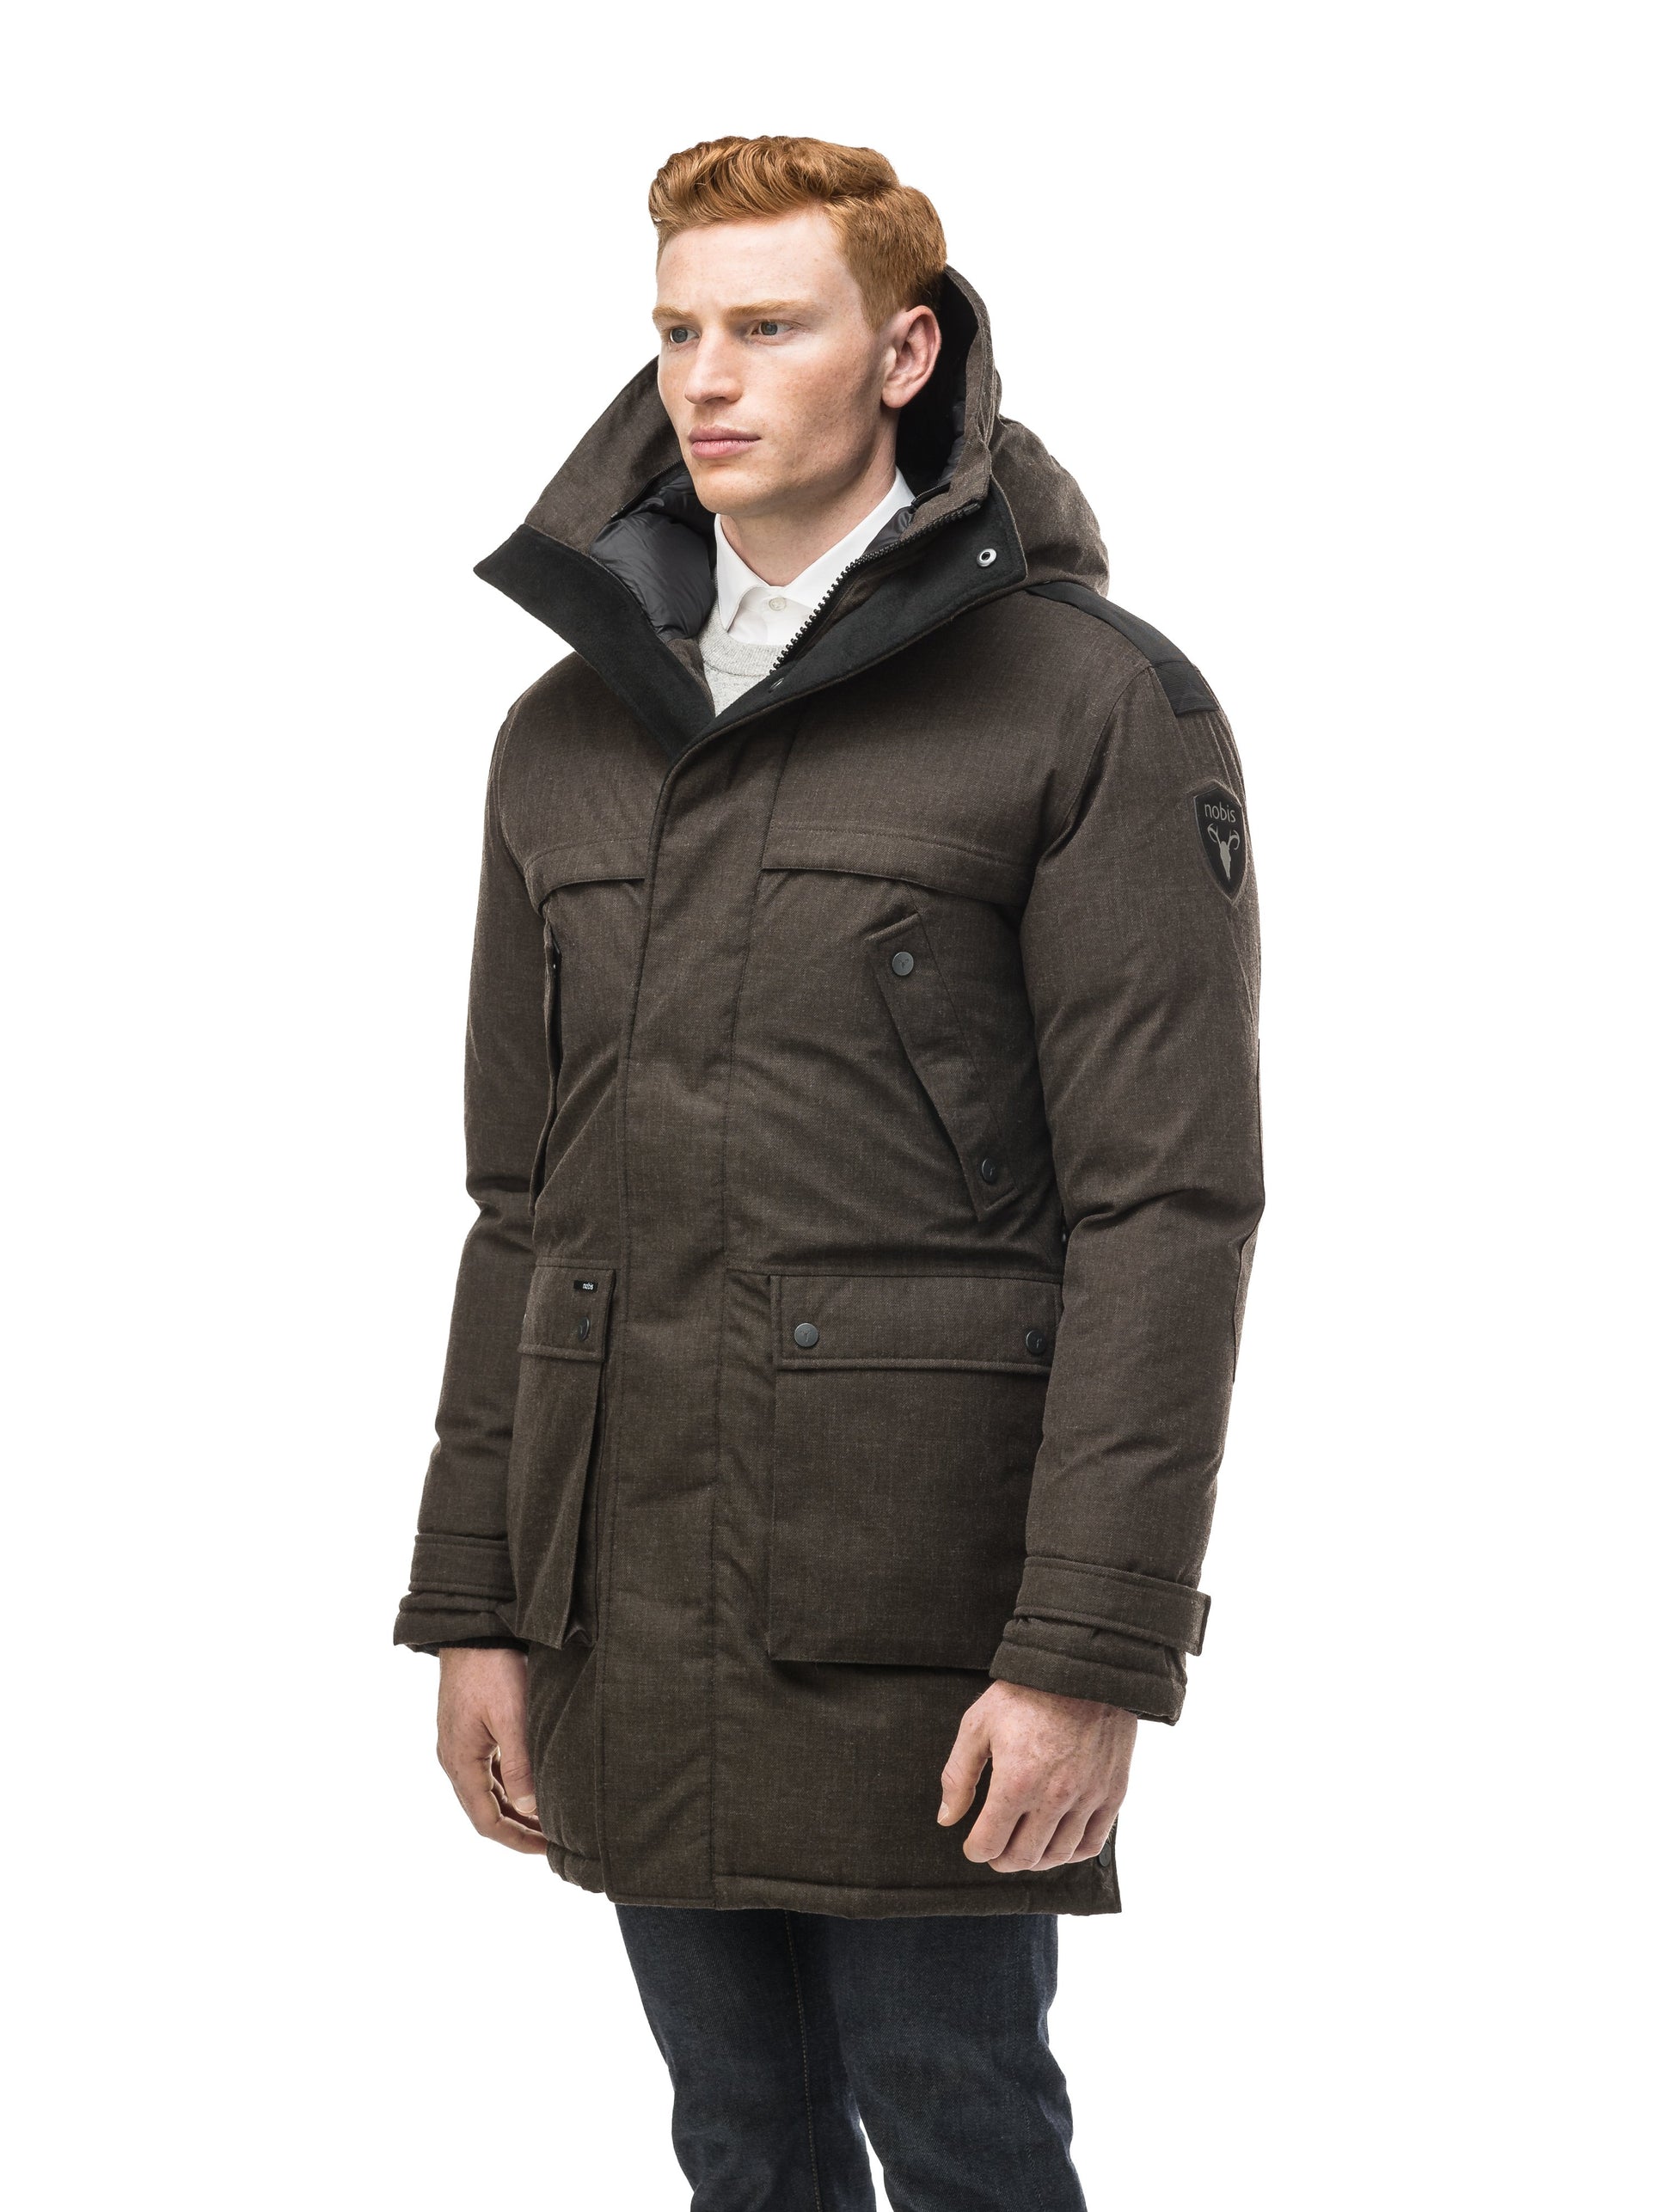 Men's Best Selling Parka the Yatesy is a down filled jacket with a zipper closure and magnetic placket in H. Brown